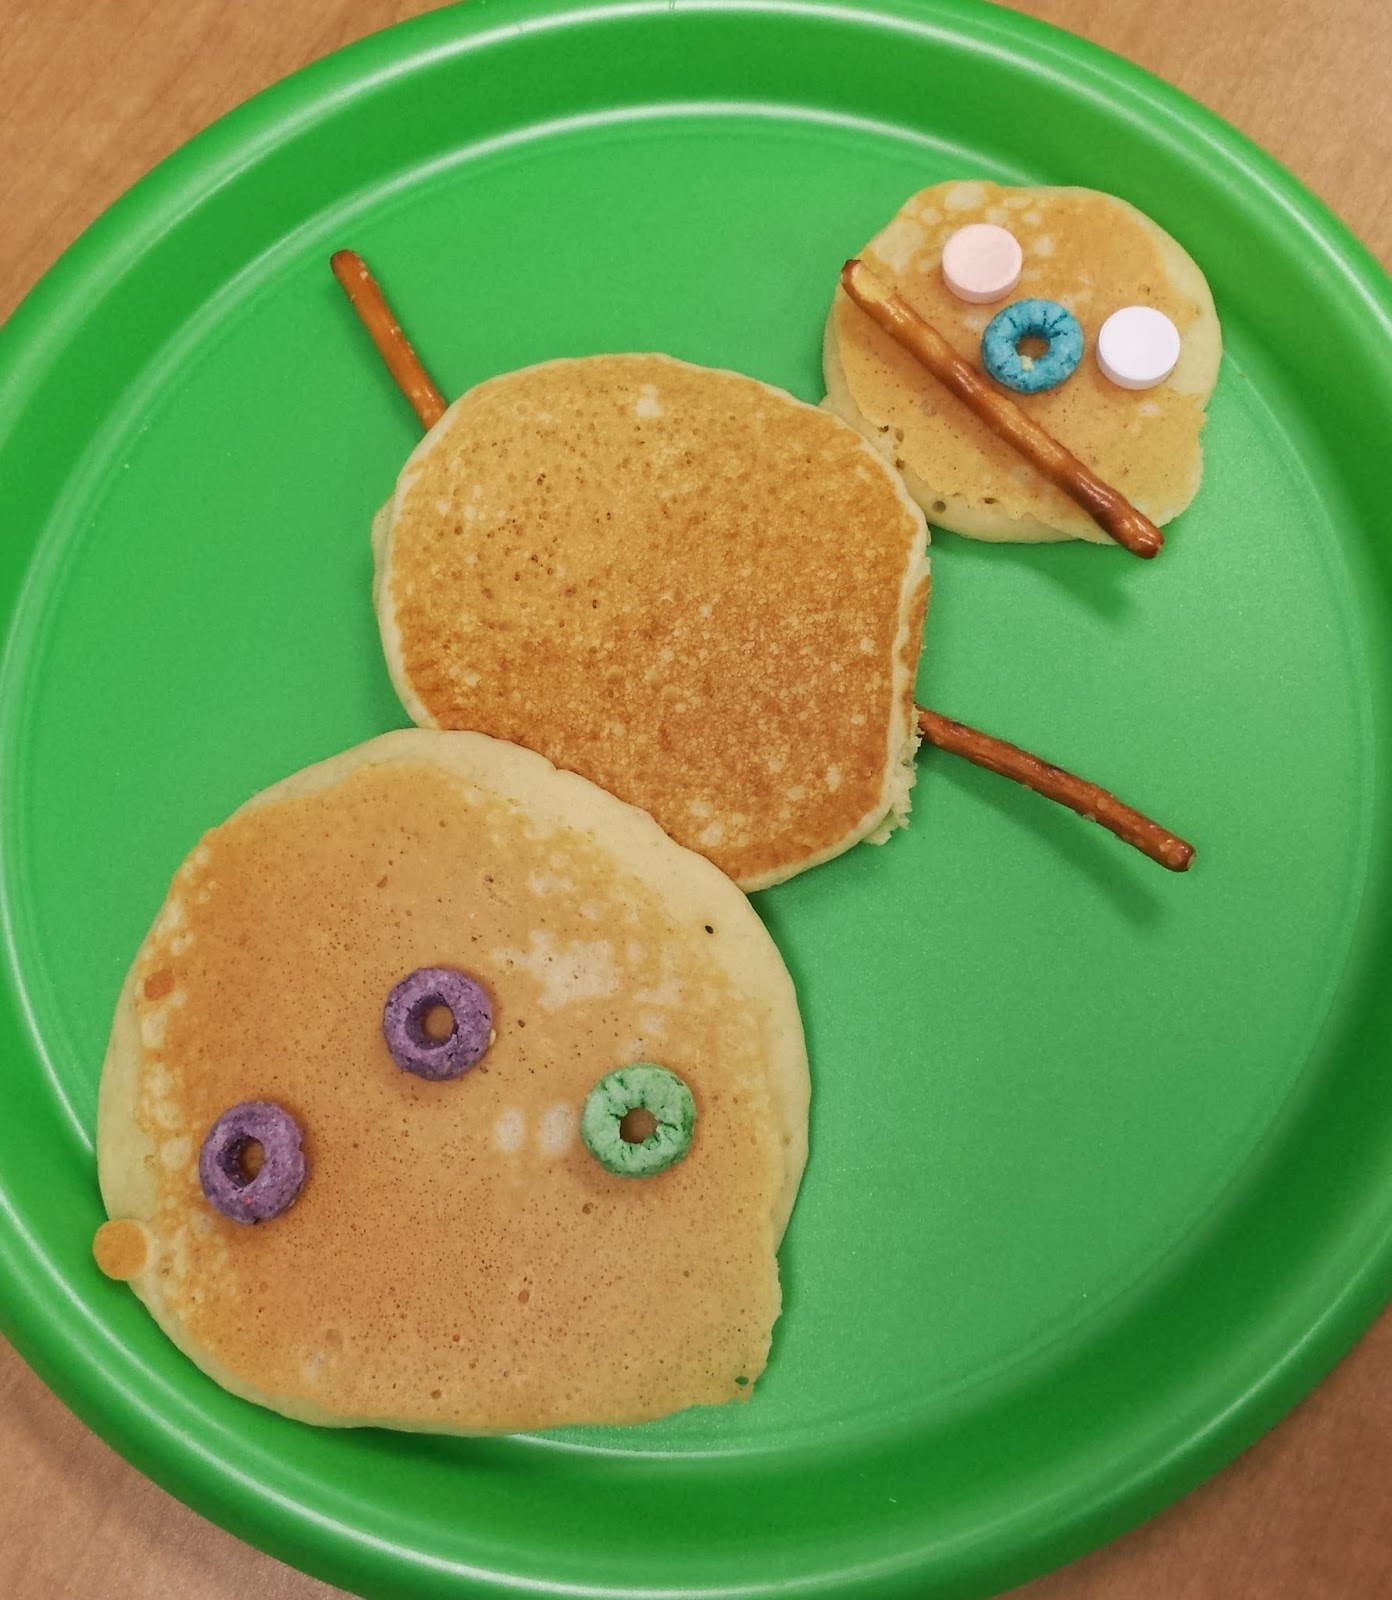 photo of snowman made out of pancakes on a green plate